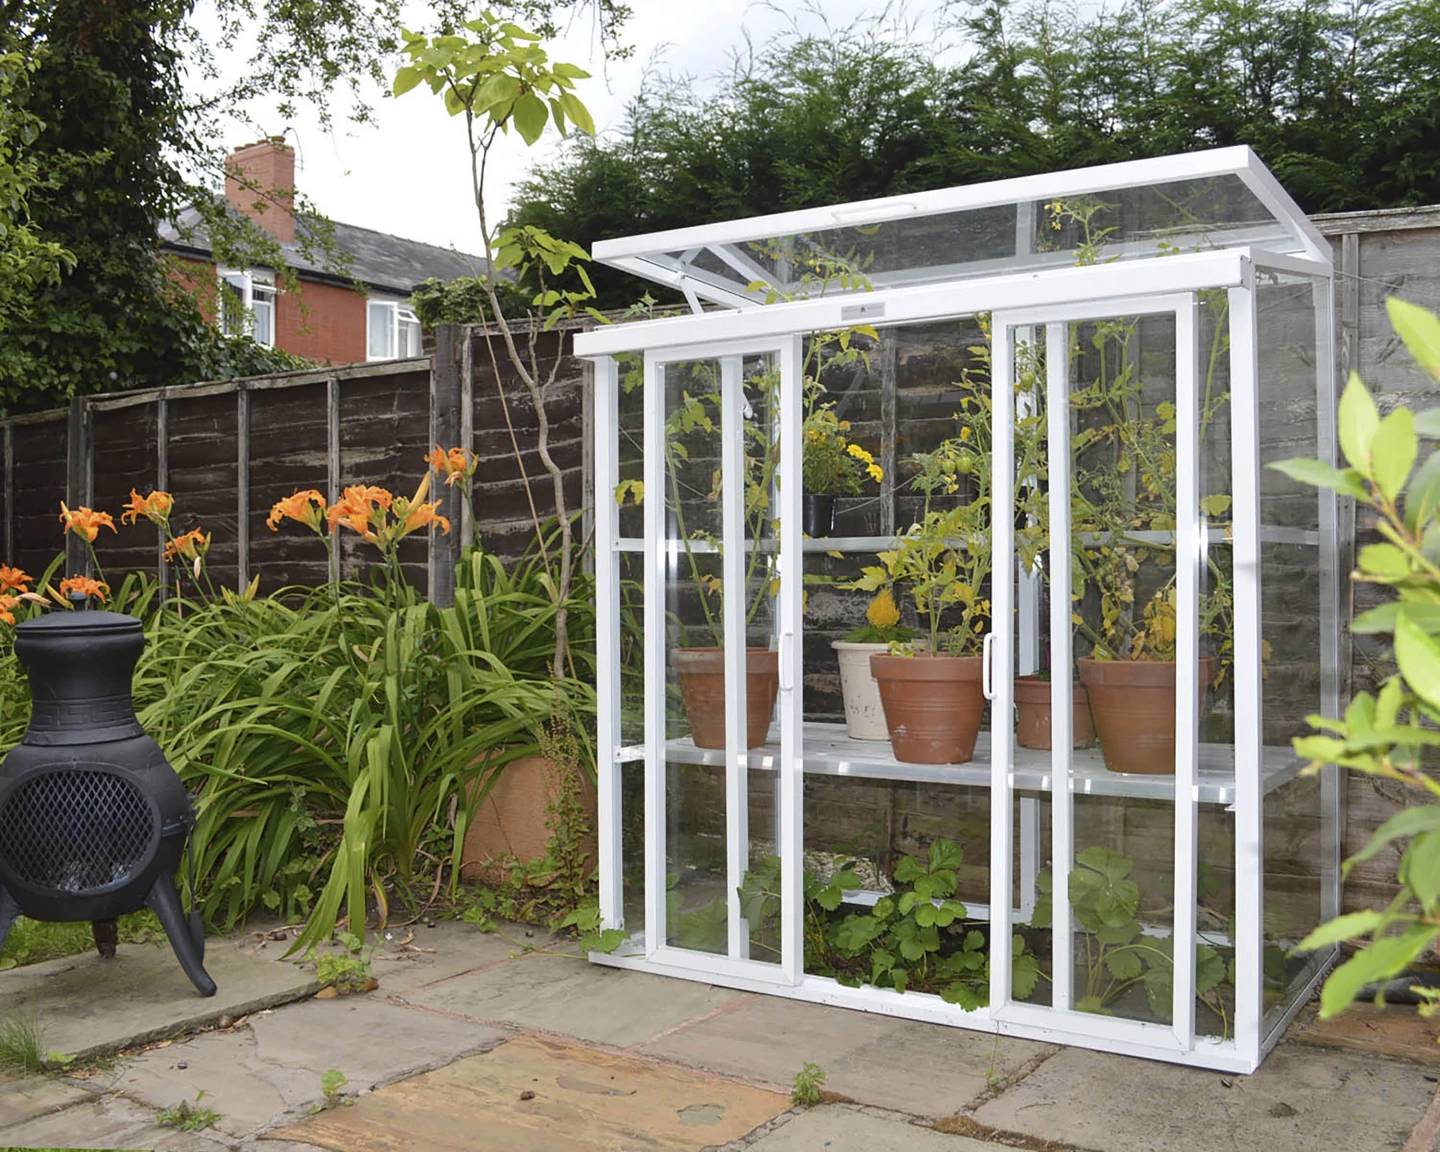 This image provided by Hartley Botanic shows a Patio model glasshouse with its hinged top pane open.